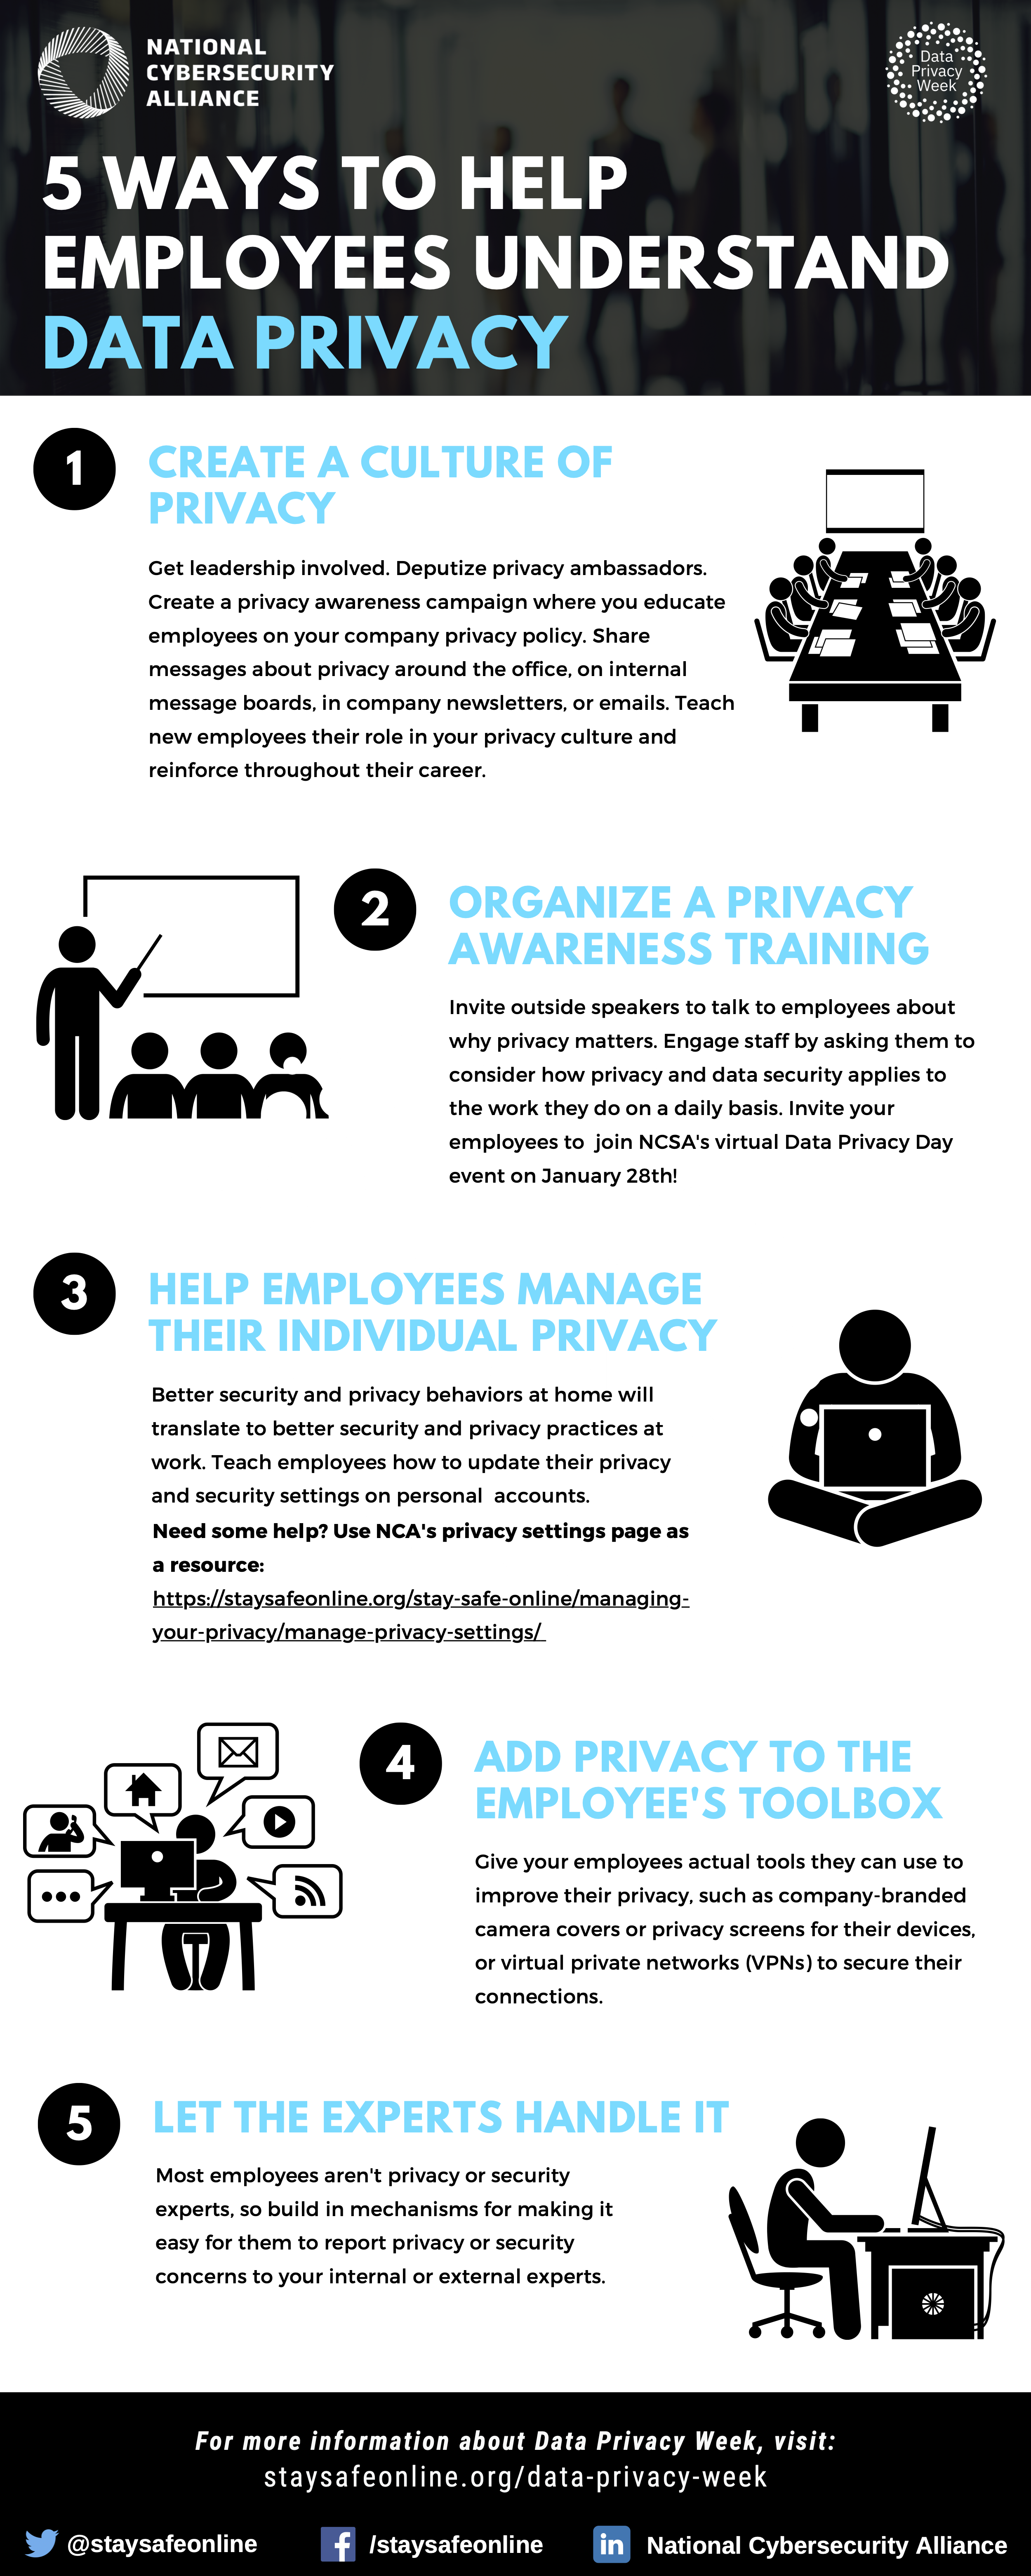 DPW2022 5 Ways to Help Employees Be #PrivacyAware